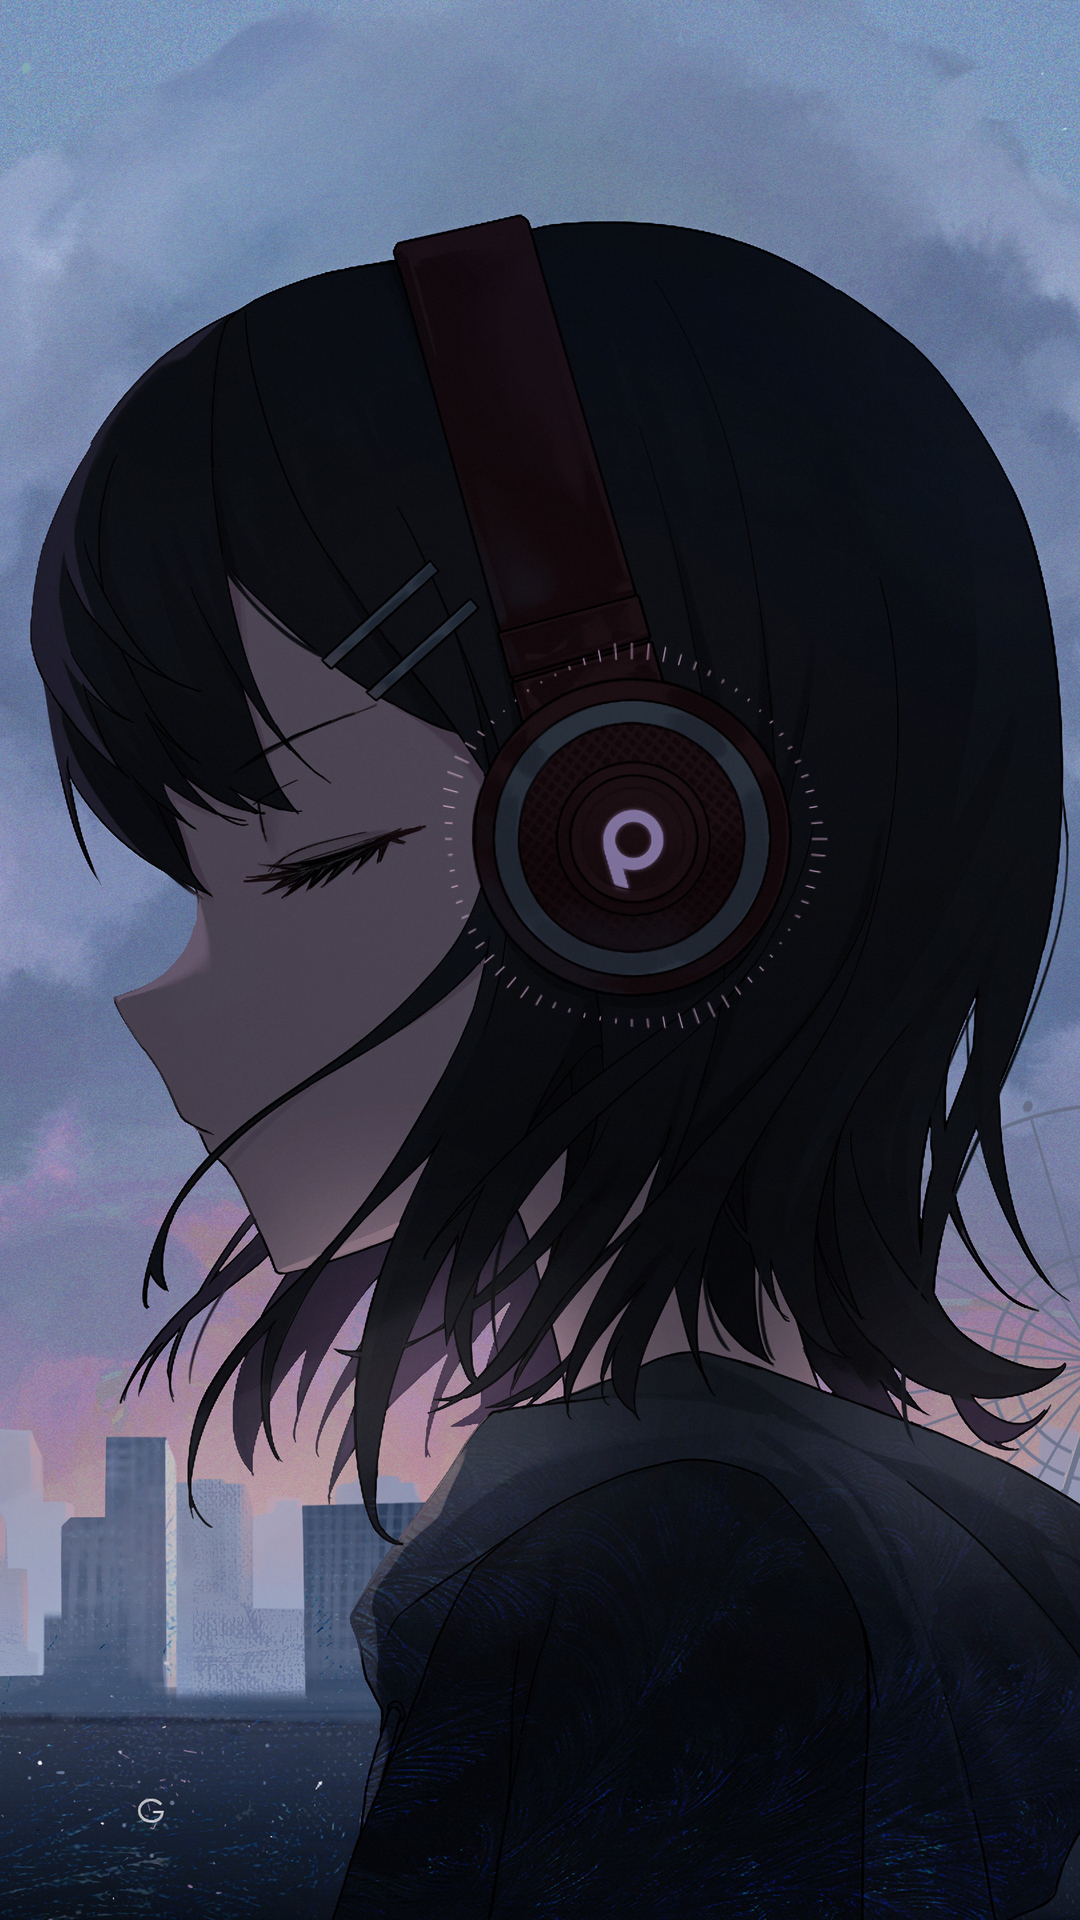 Download Girl listening to music, Anime, Young woman, Music, Headphones  Wallpaper in 1080x1920 Resolution